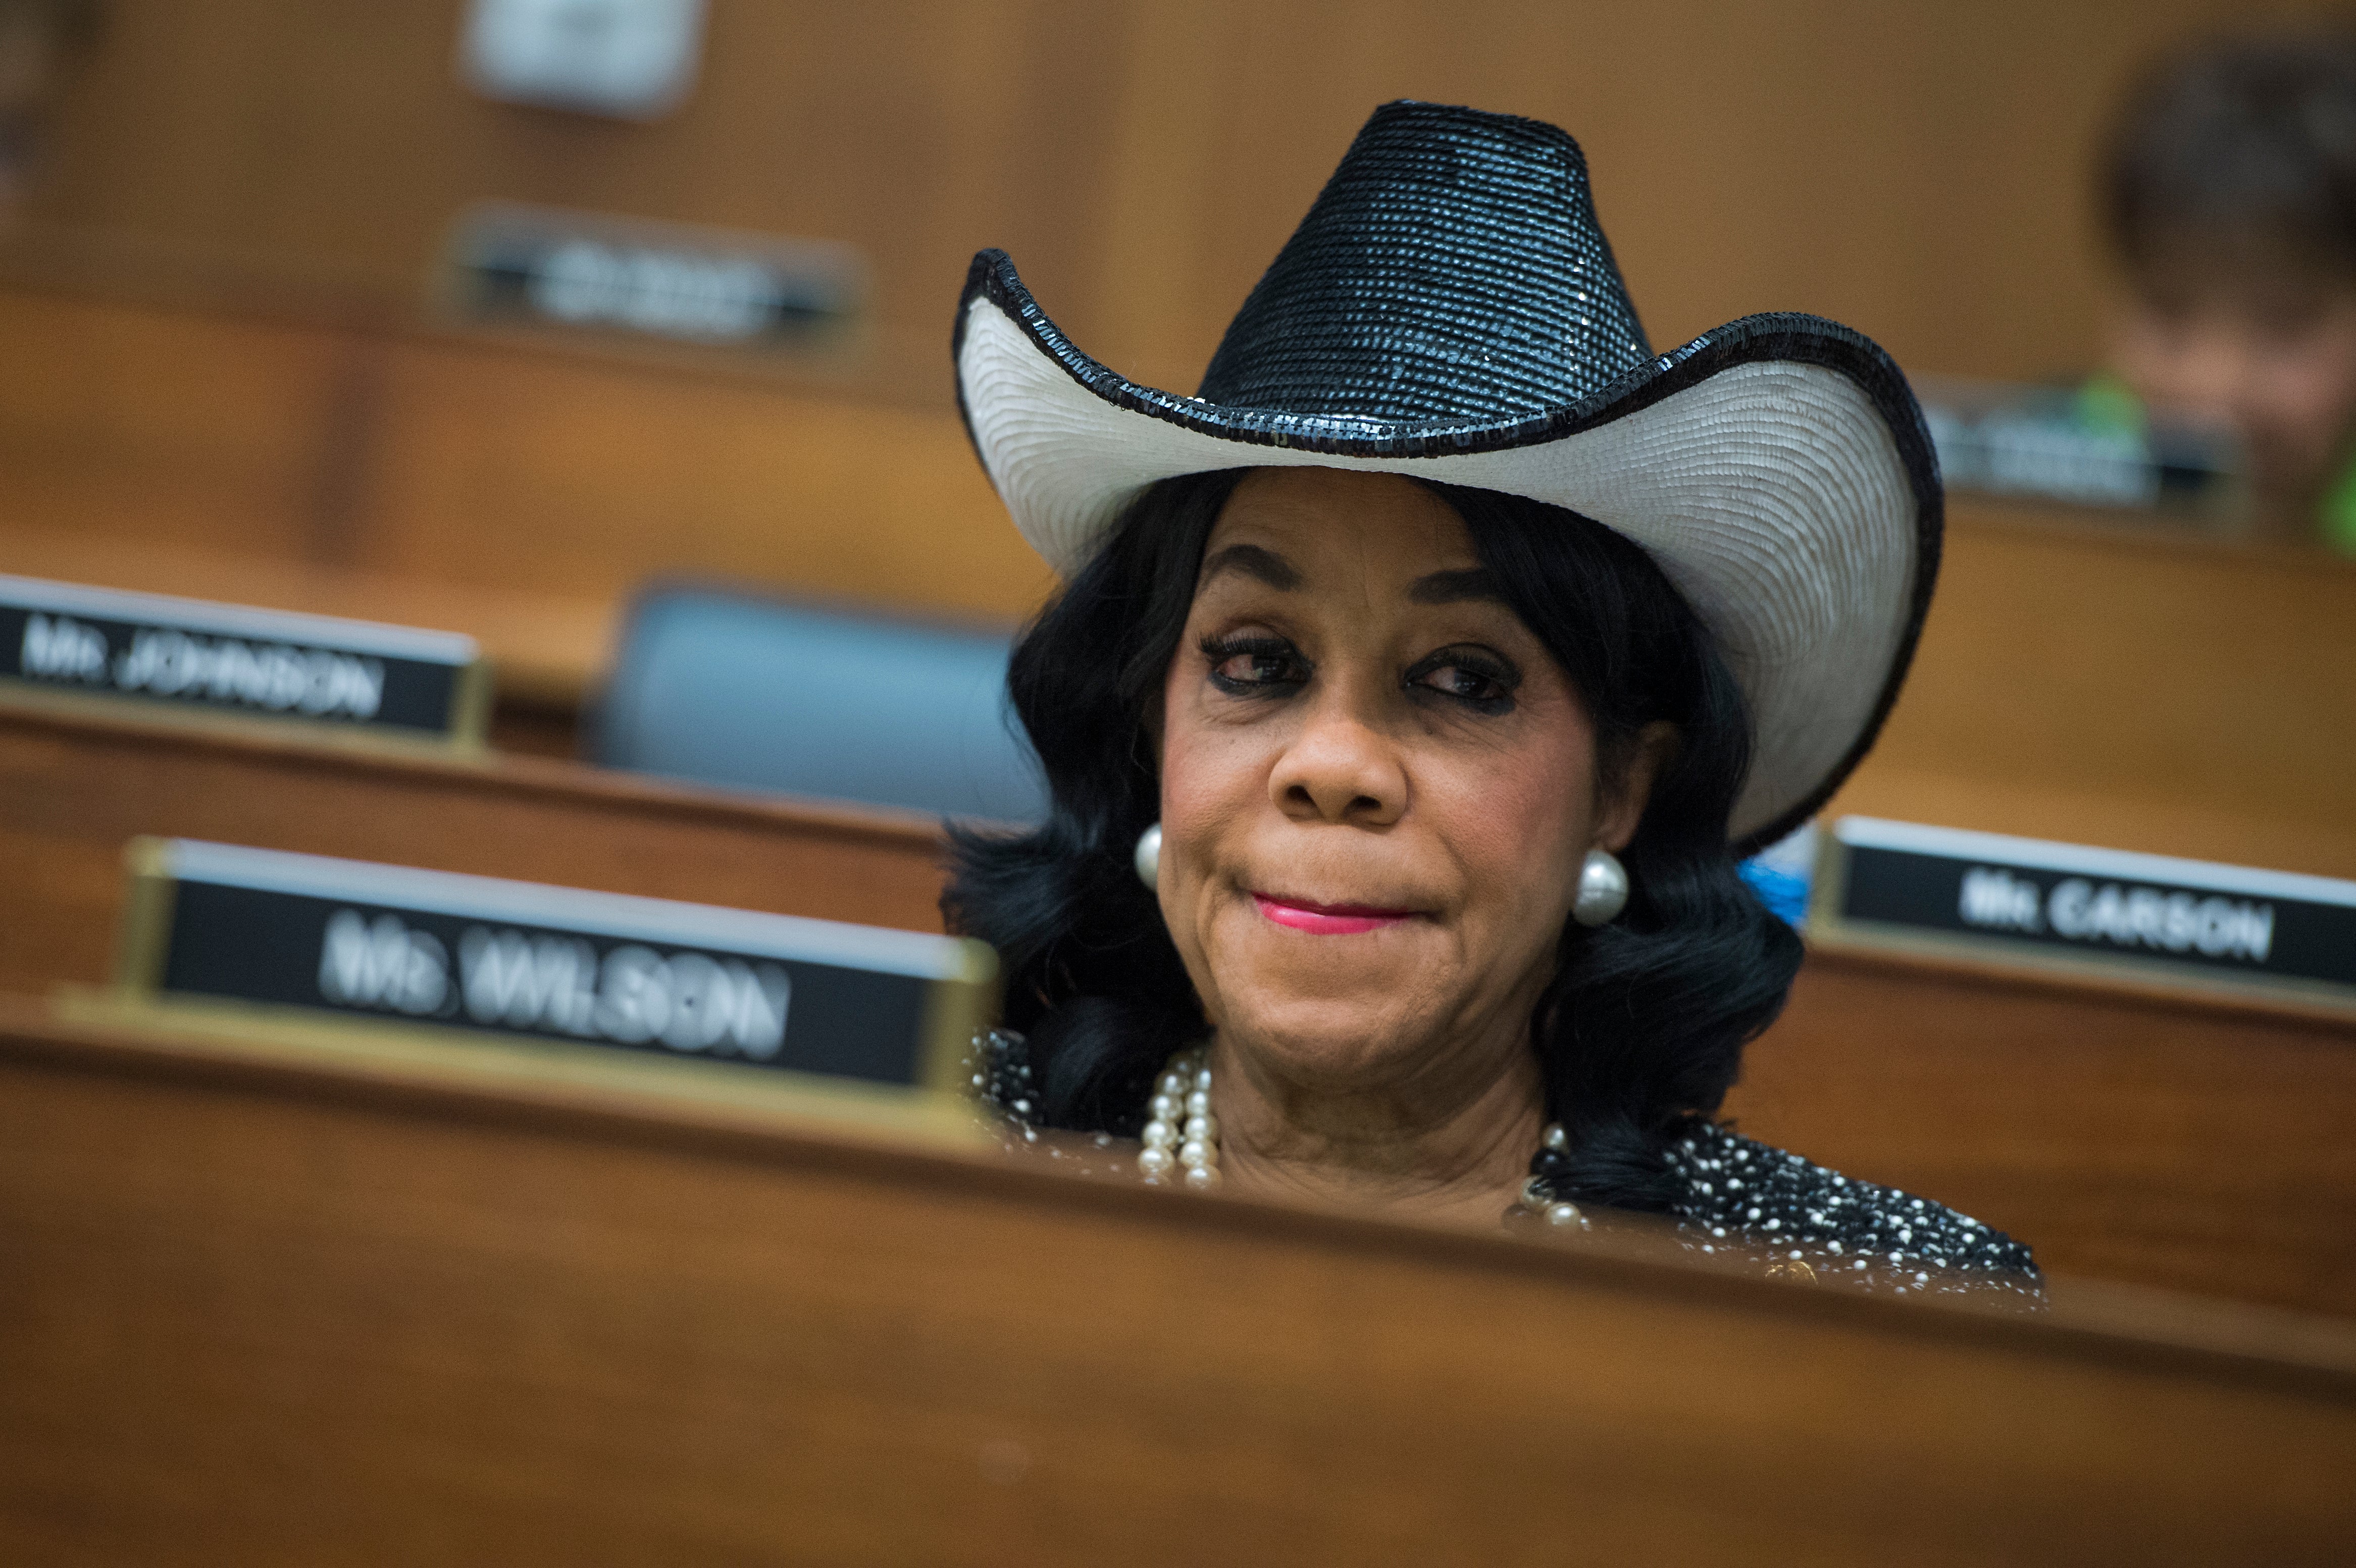 #IBelieveFrederica: What To Know About The Dispute Between Rep. Frederica Wilson, Trump And A Gold Star Family
